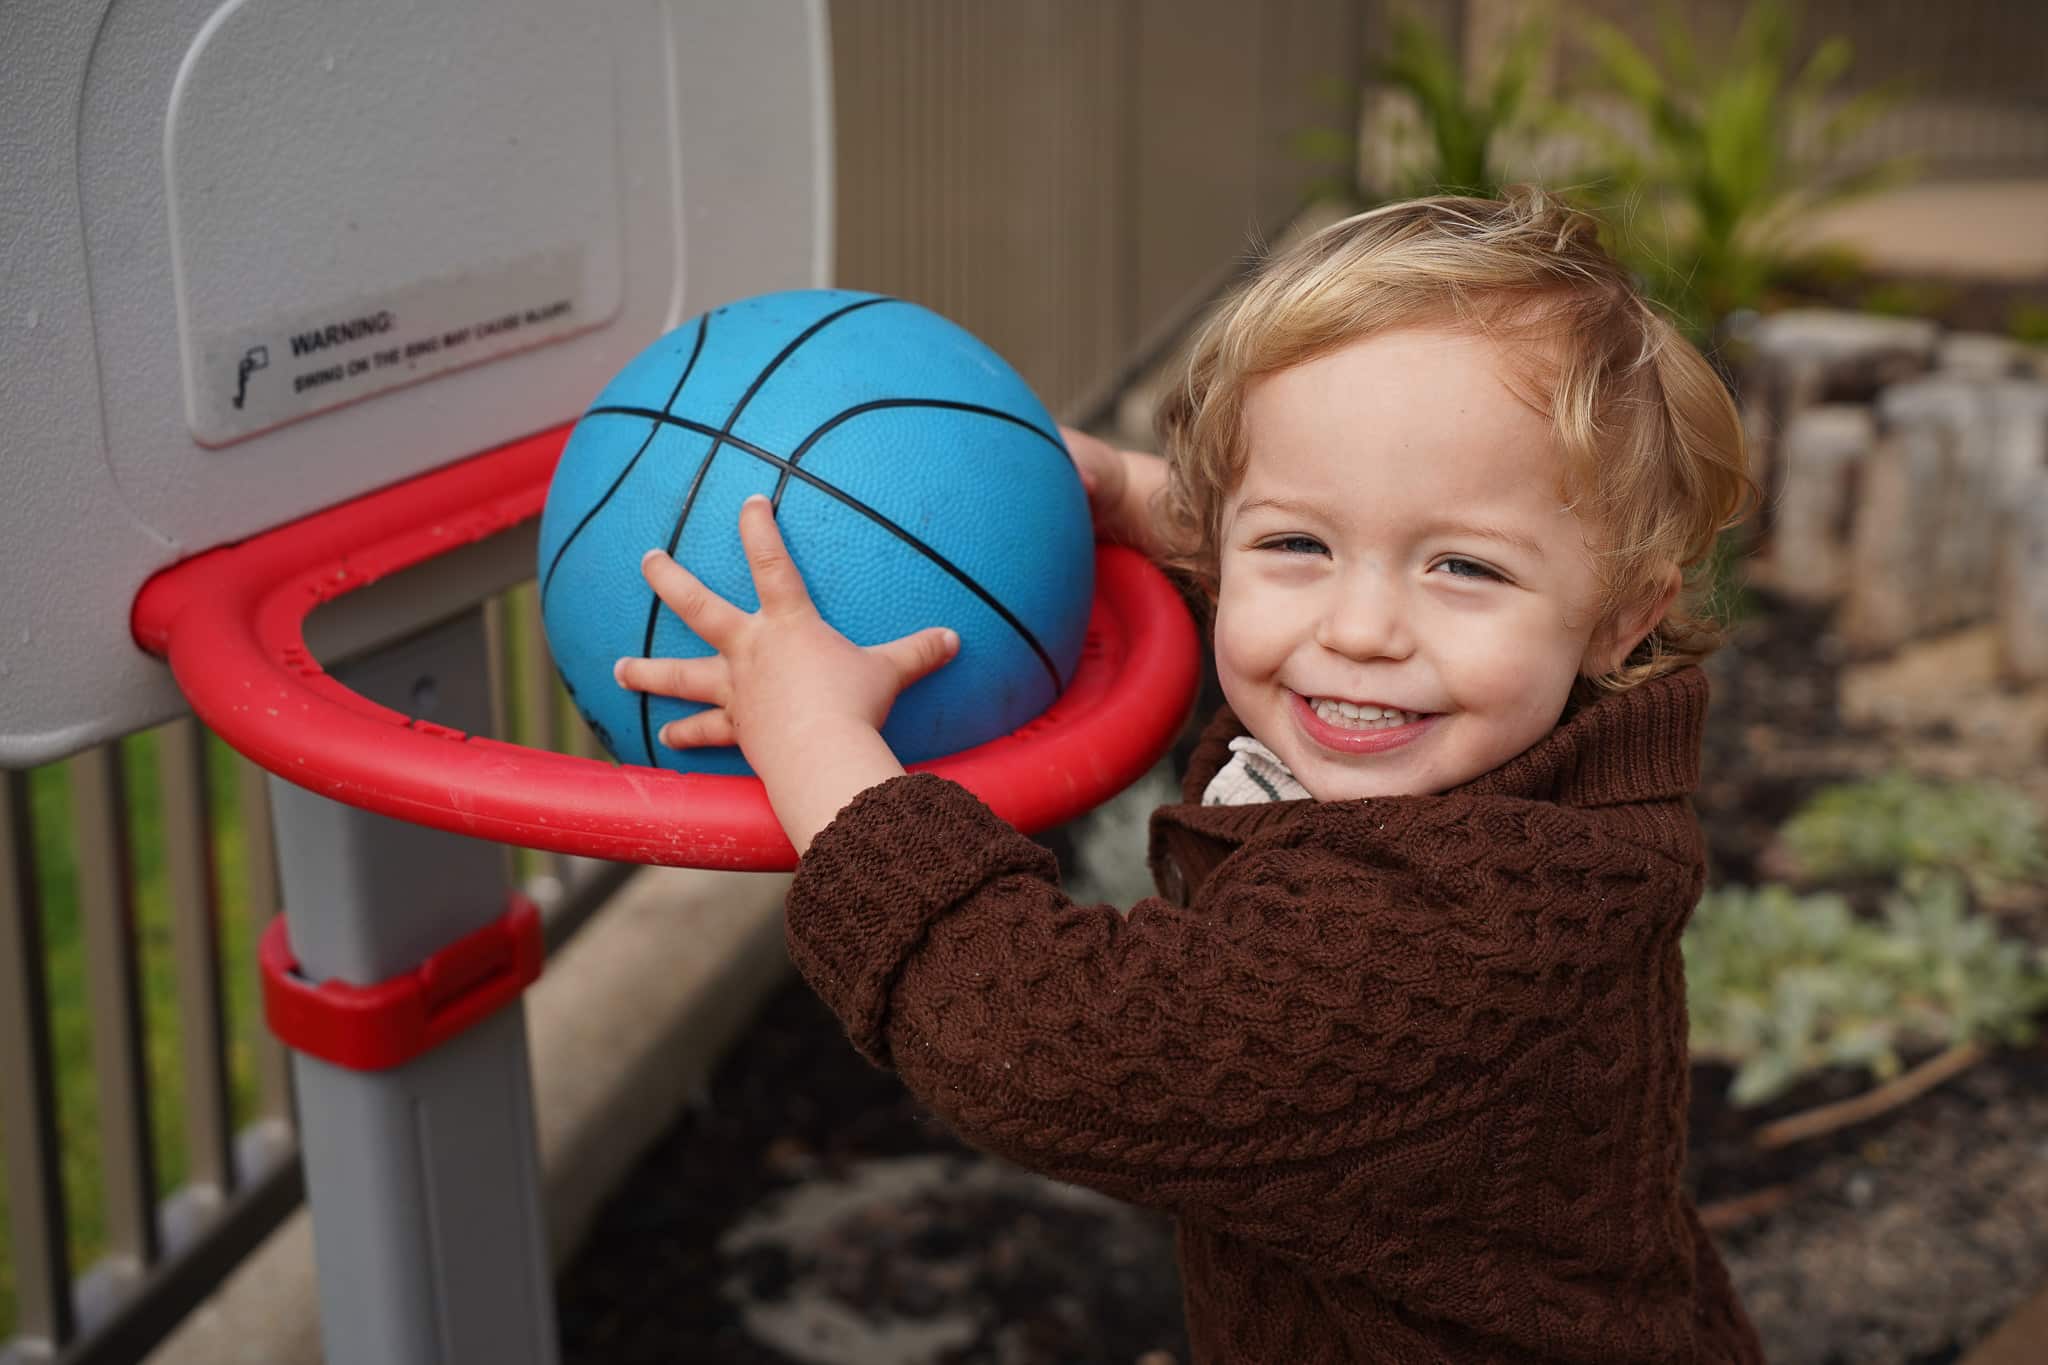 Child playing with a ball outdoors during playgroup